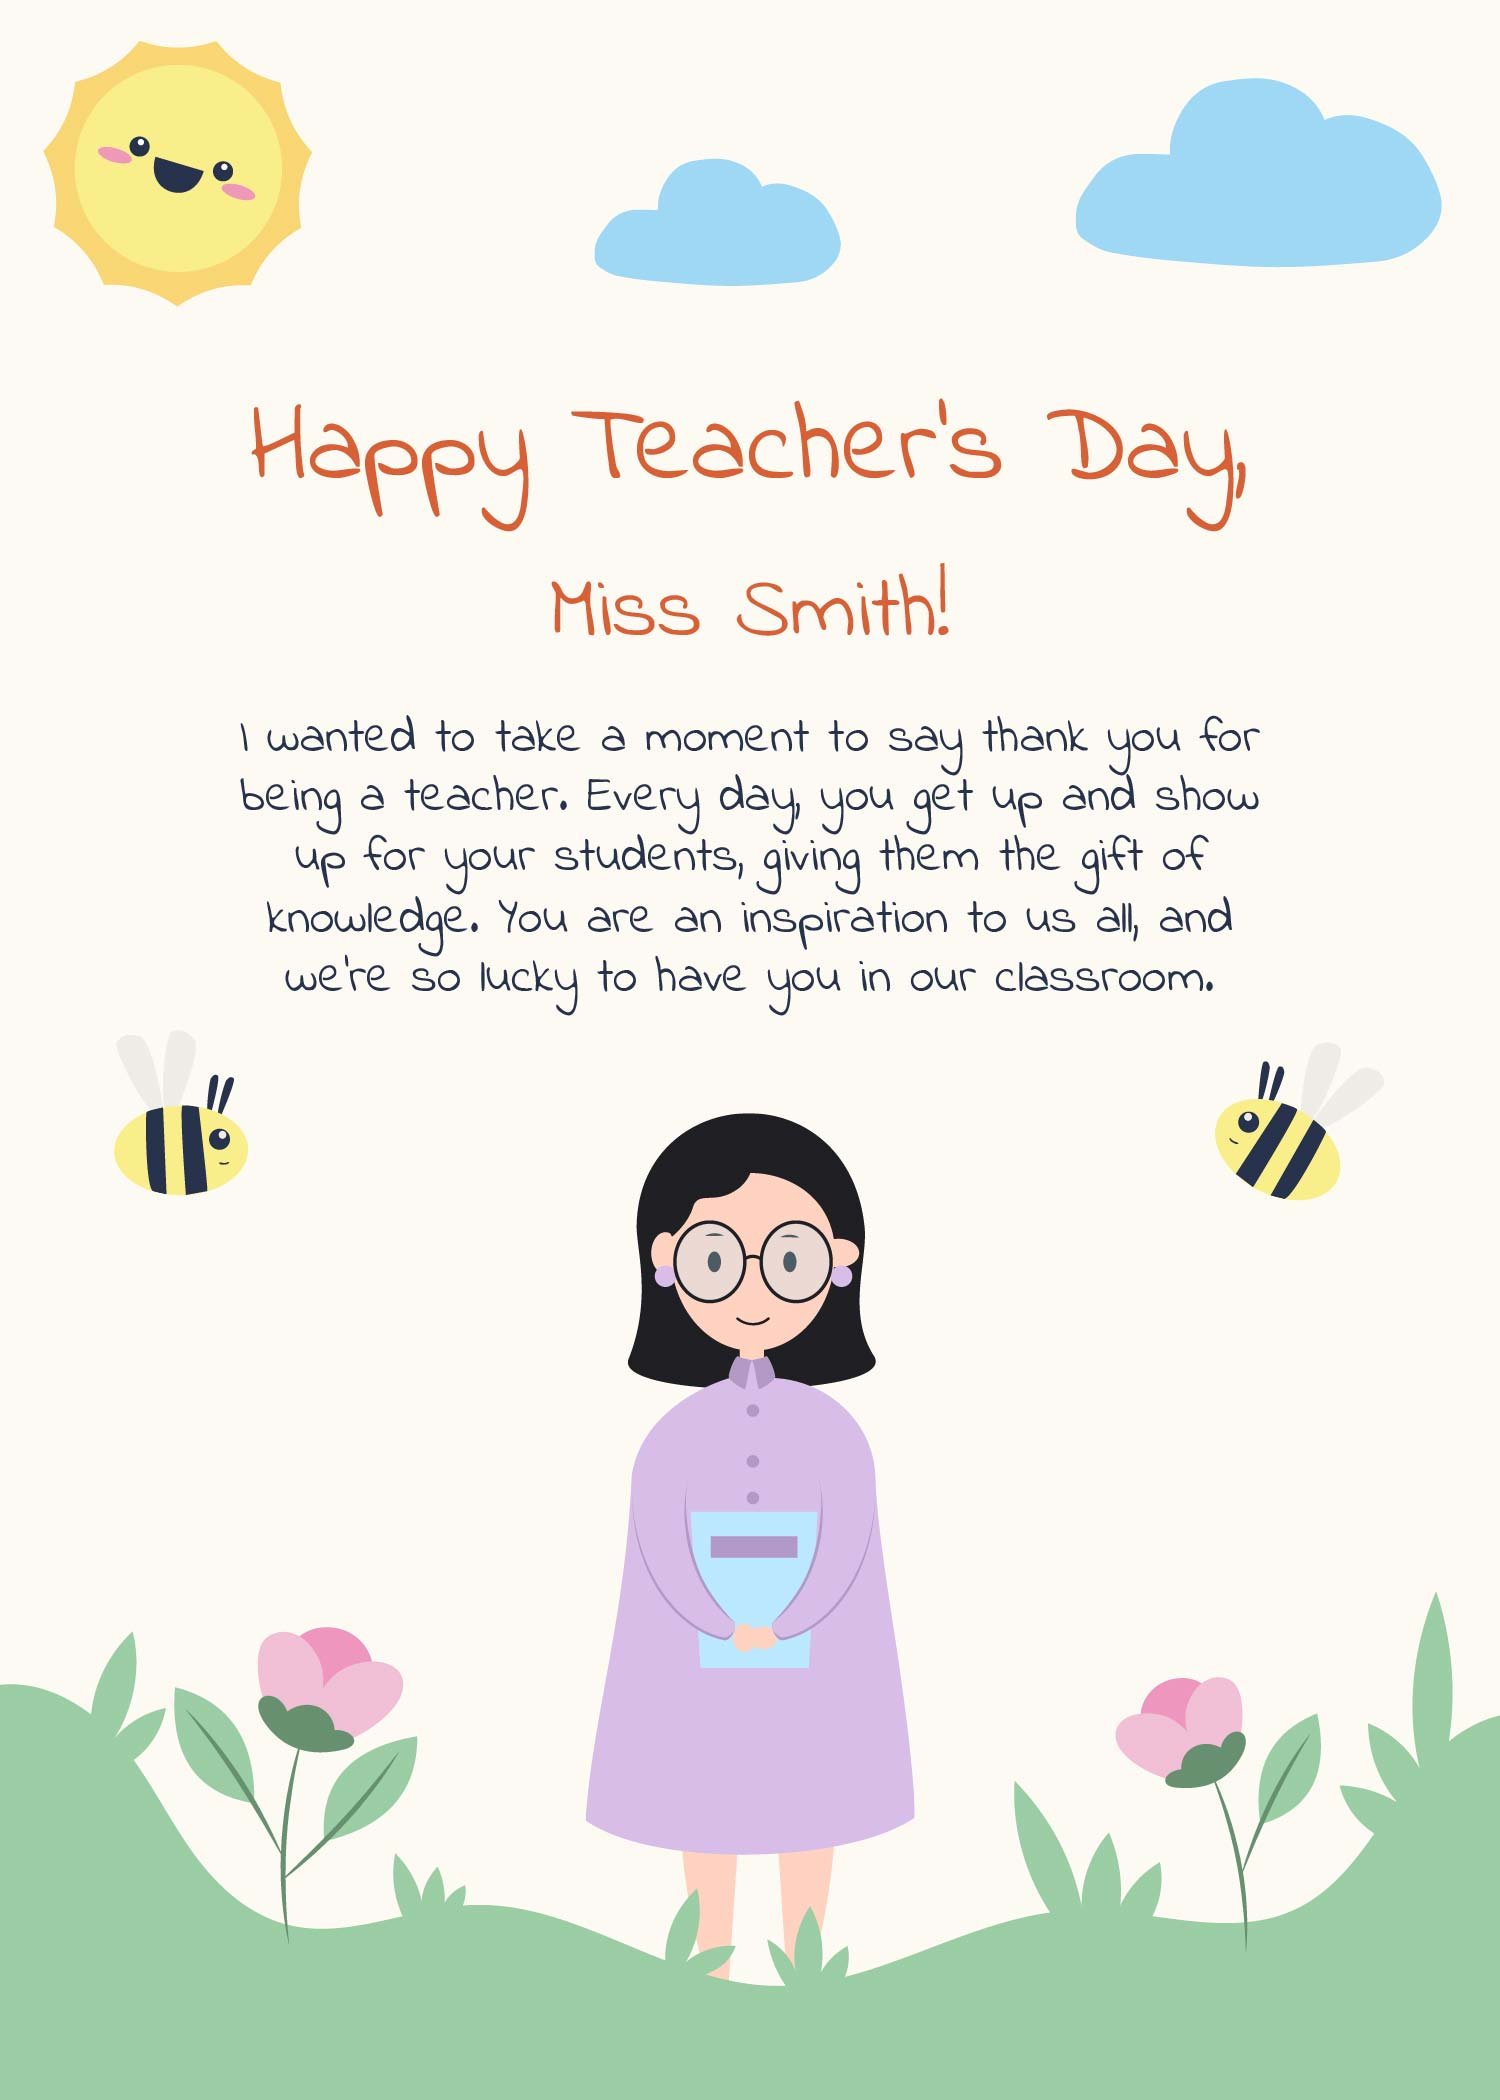 Free Cute Teacher's Day Card in Word, Illustrator, PSD, Apple Pages, Publisher